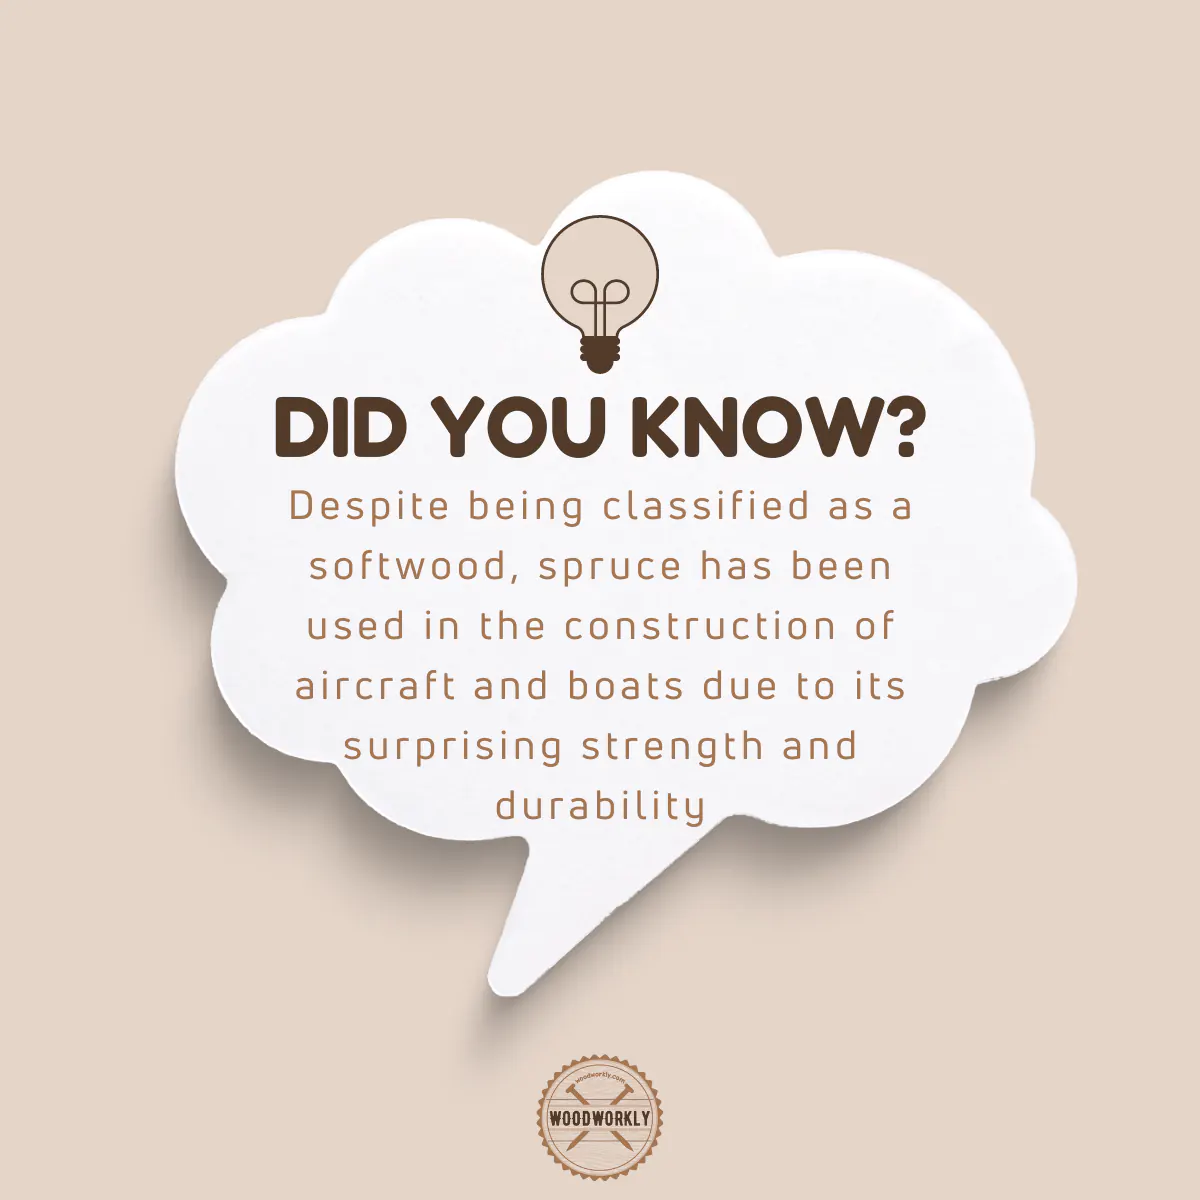 Did you Know Fact about Spruce